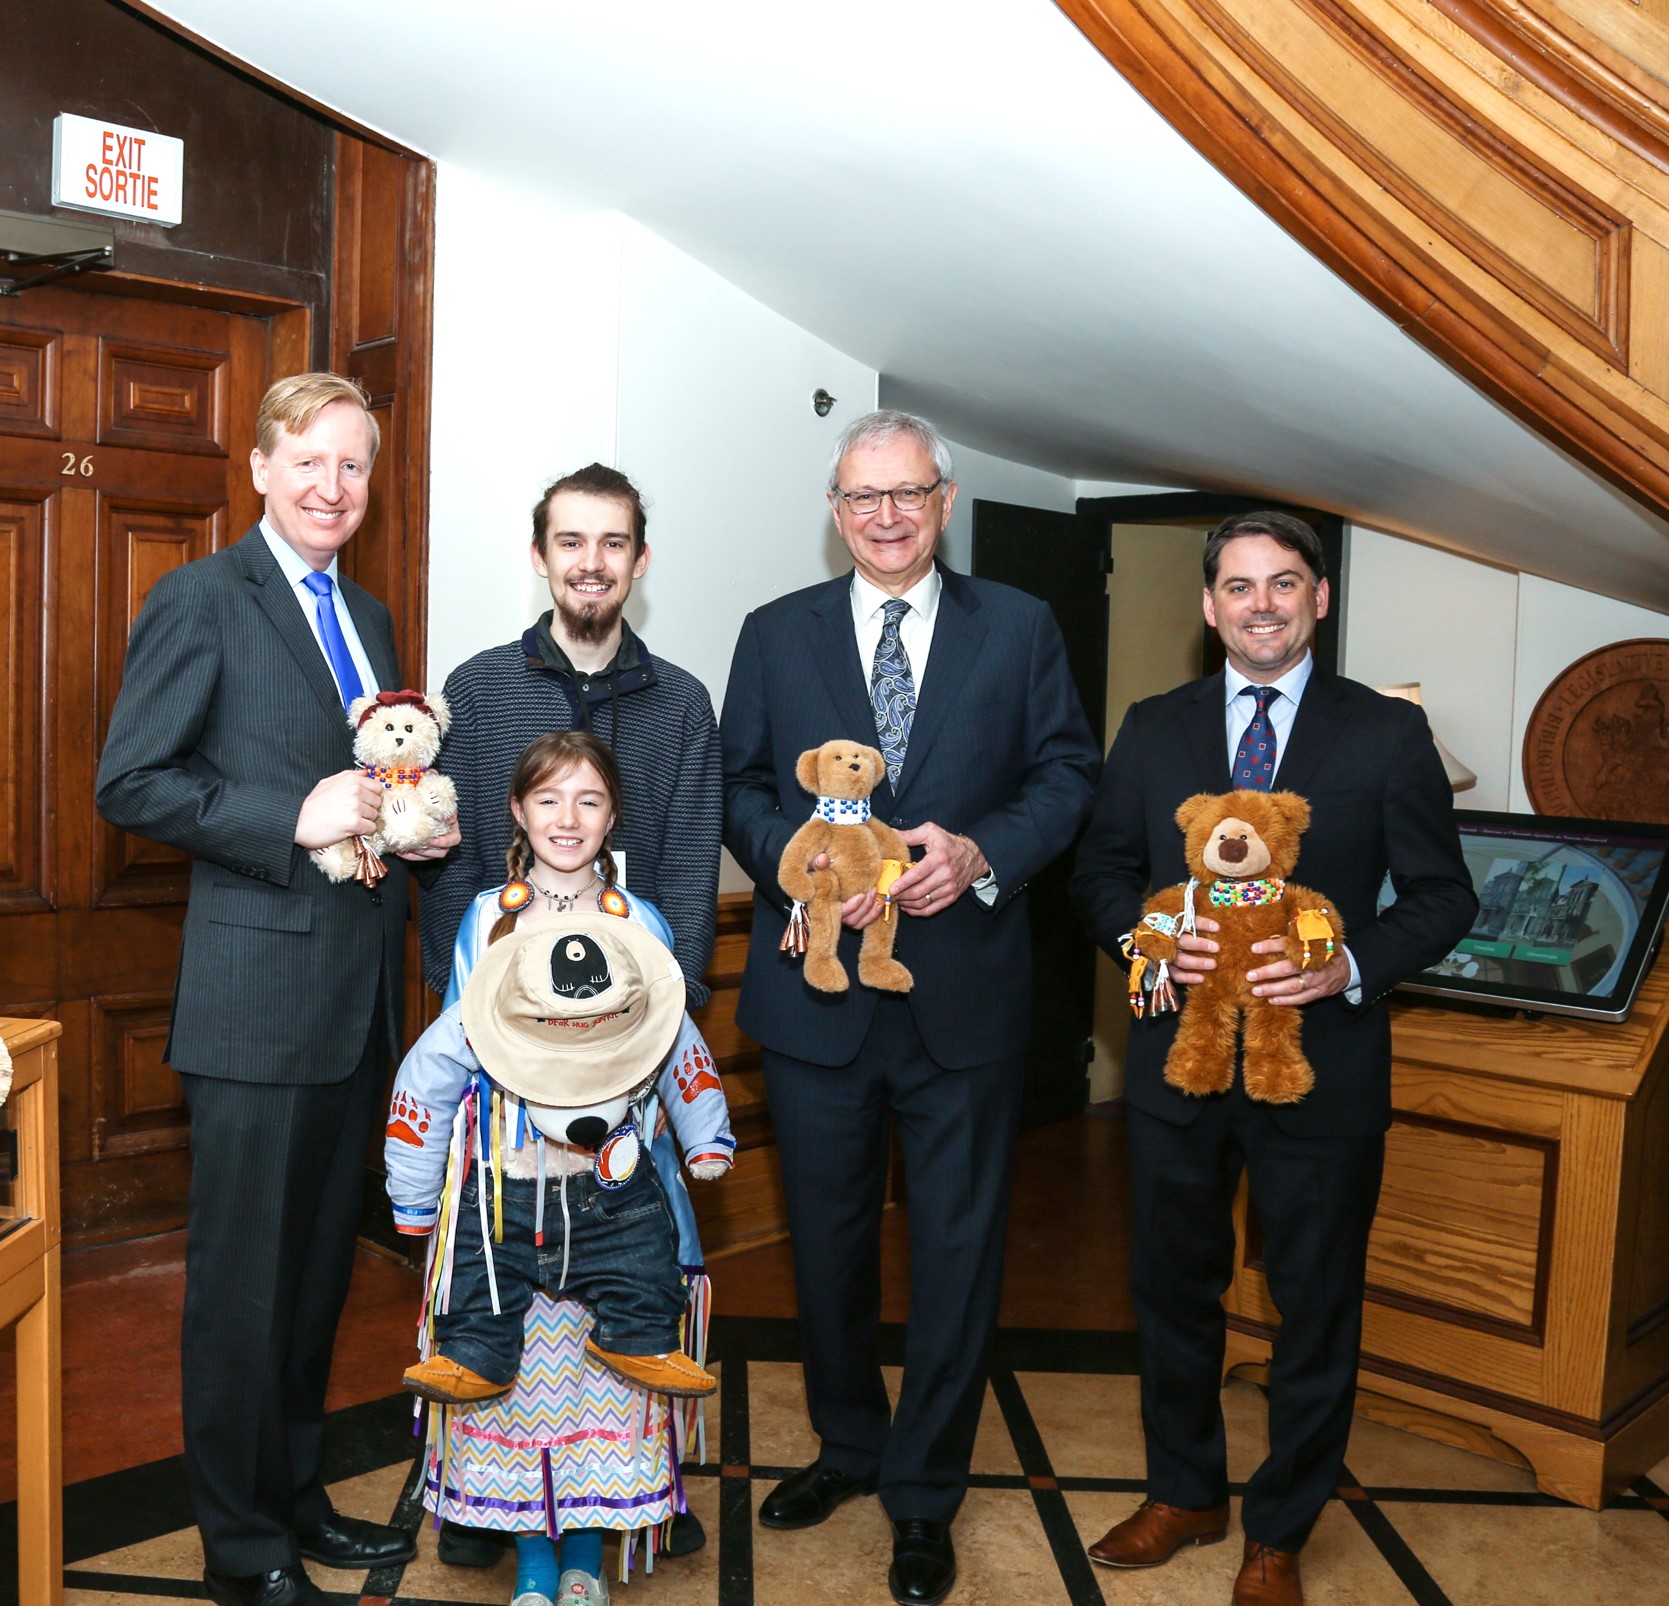 May 10th is Bear Witness Day, an important day in the history of Jordan’s Principle. Plush bears are being held as symbols (Premier Blaine Higgs, Minister Jake Stewart and Minister Dominic Cardy with invited guests Candra Perley and Cole Perley). Credits to: Province of New Brunswick.